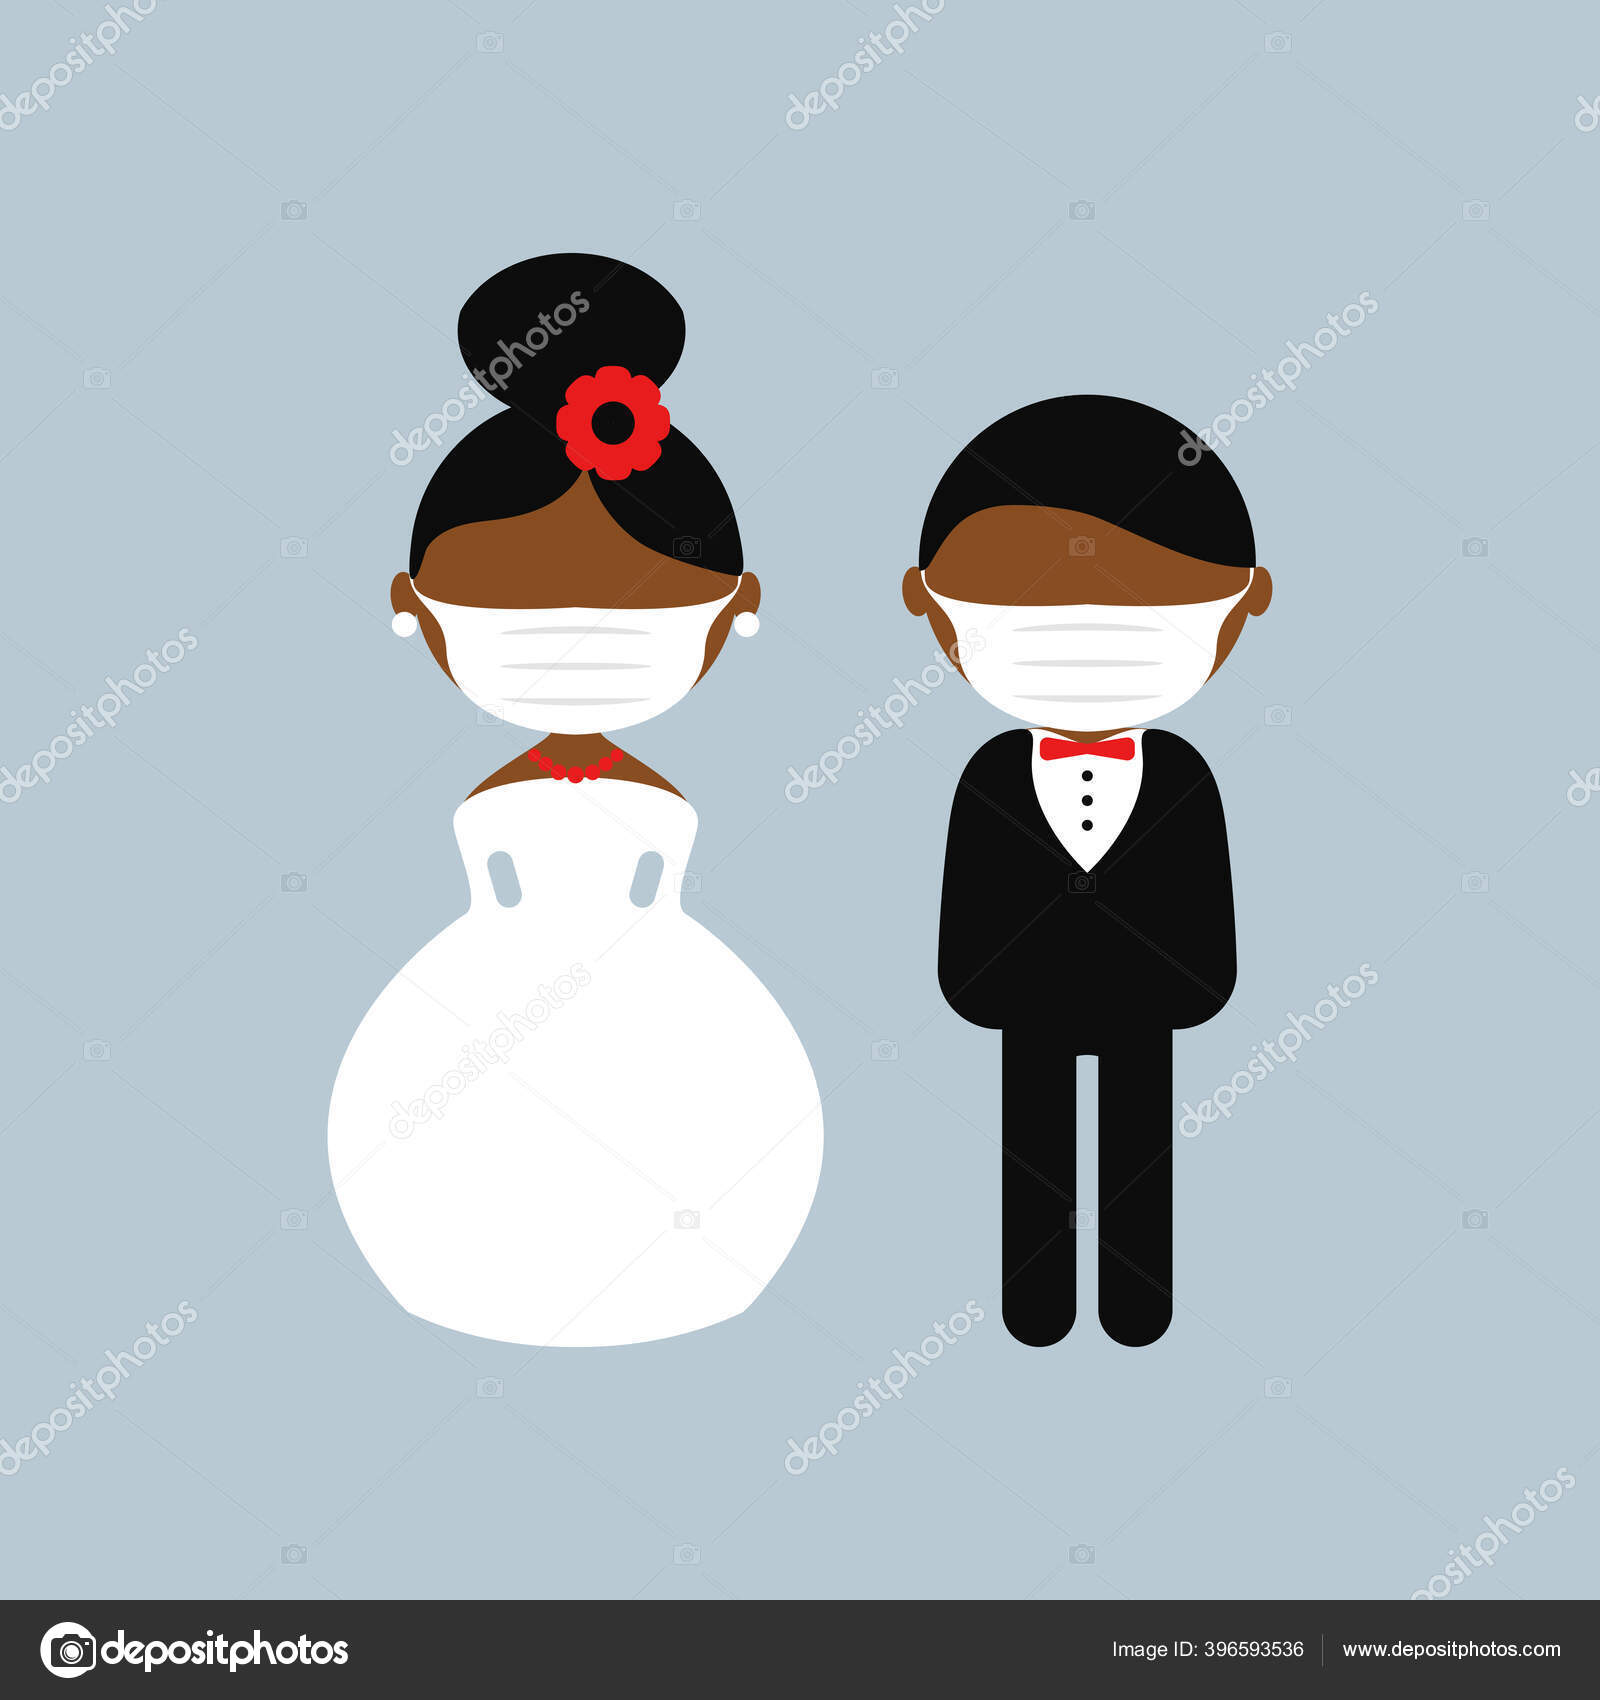 Cartoon Dark Skin Wedding Characters Bride And Groom Wearing Medical Face Mask Couple Newlyweds Vector Flat Avatars Icons Male Female Covid 2019 Corona Virus Black Lives Matter Theme Vector Image By C